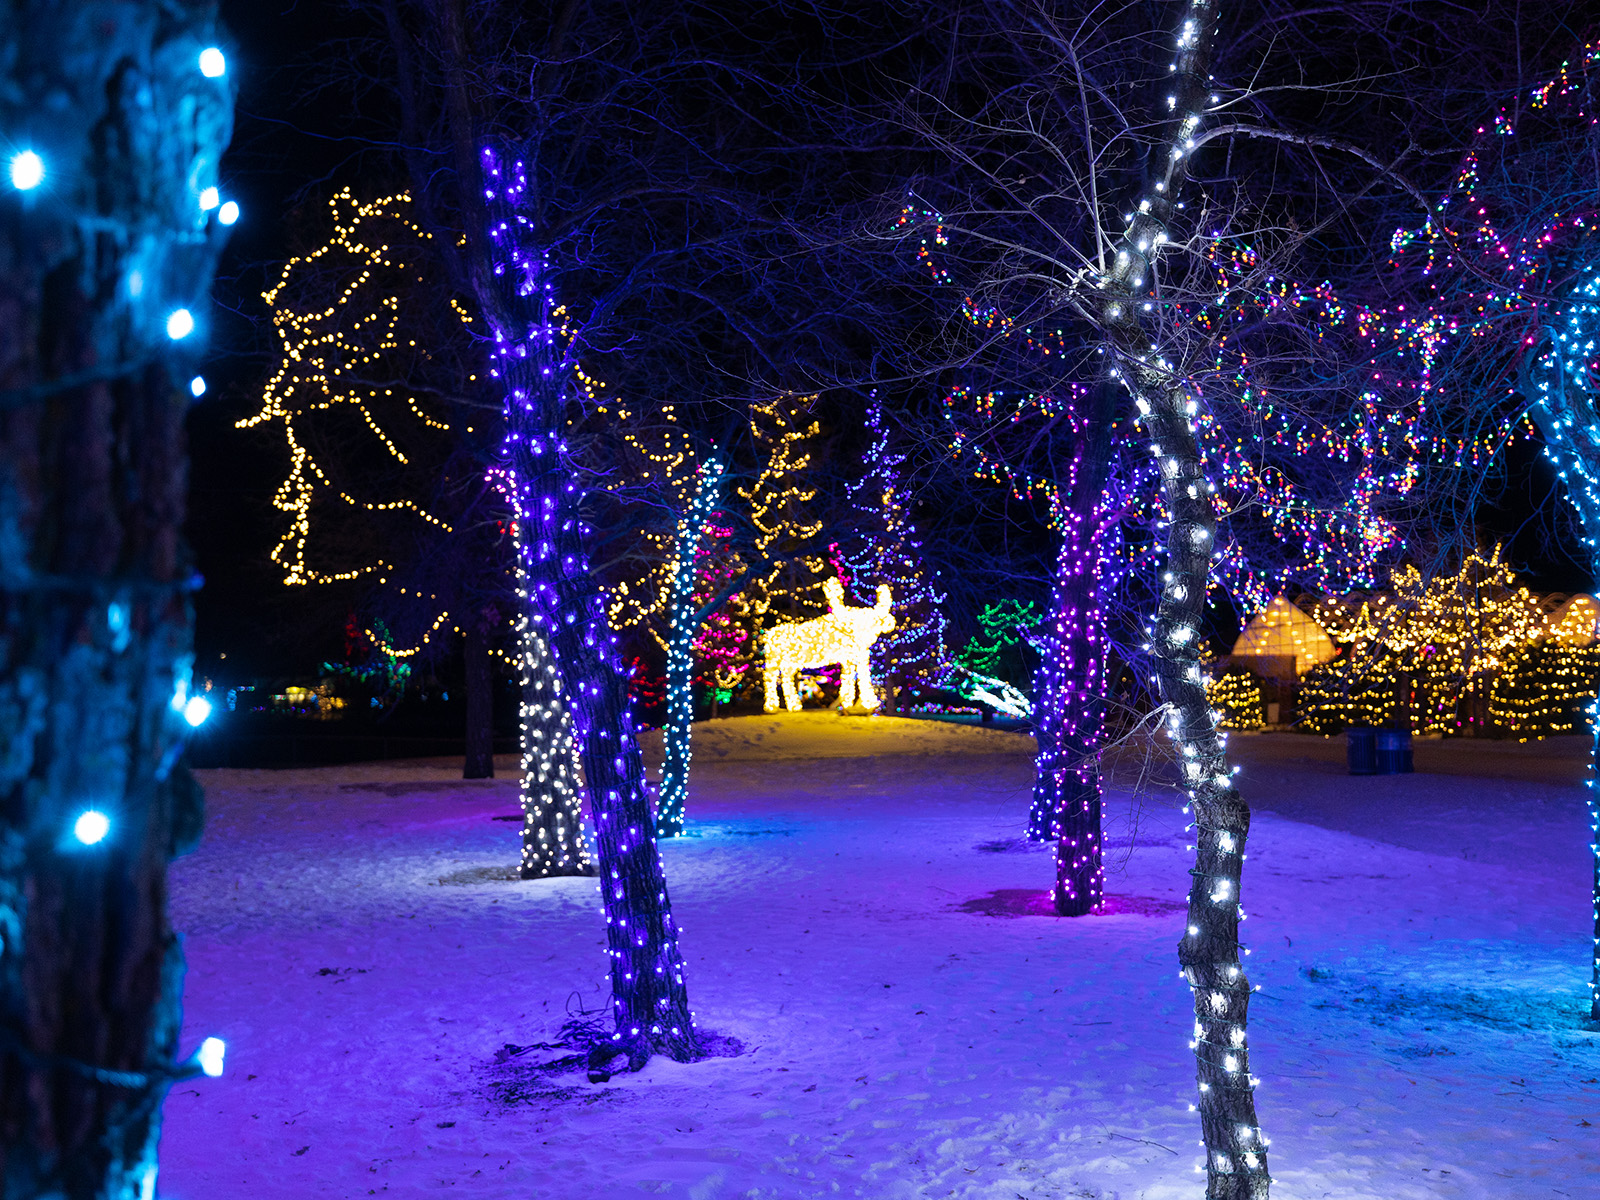 Lit trees surround a large moose made of lights